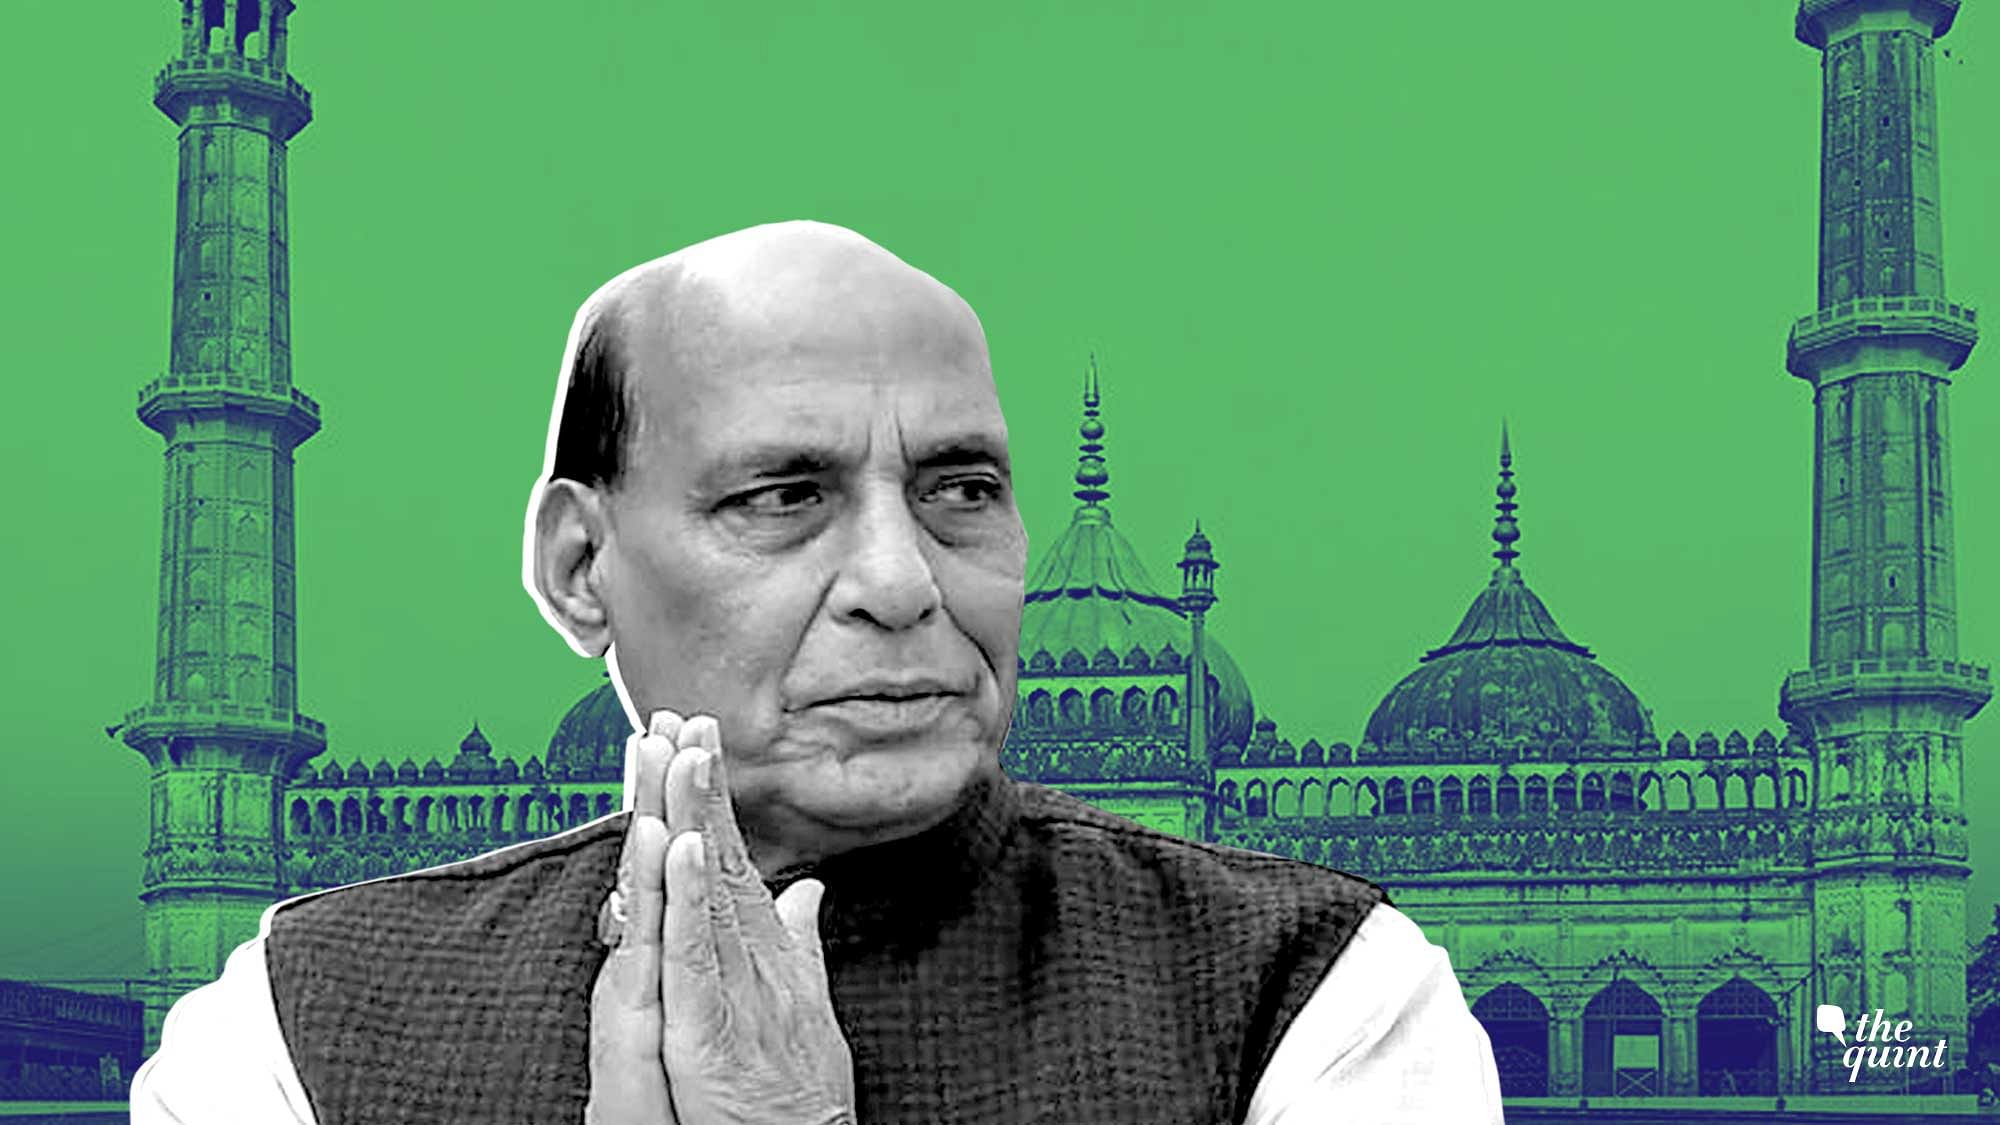 Image of Rajnath Singh against backgrounf of Lucknow’s Imambada, used for representational purposes.